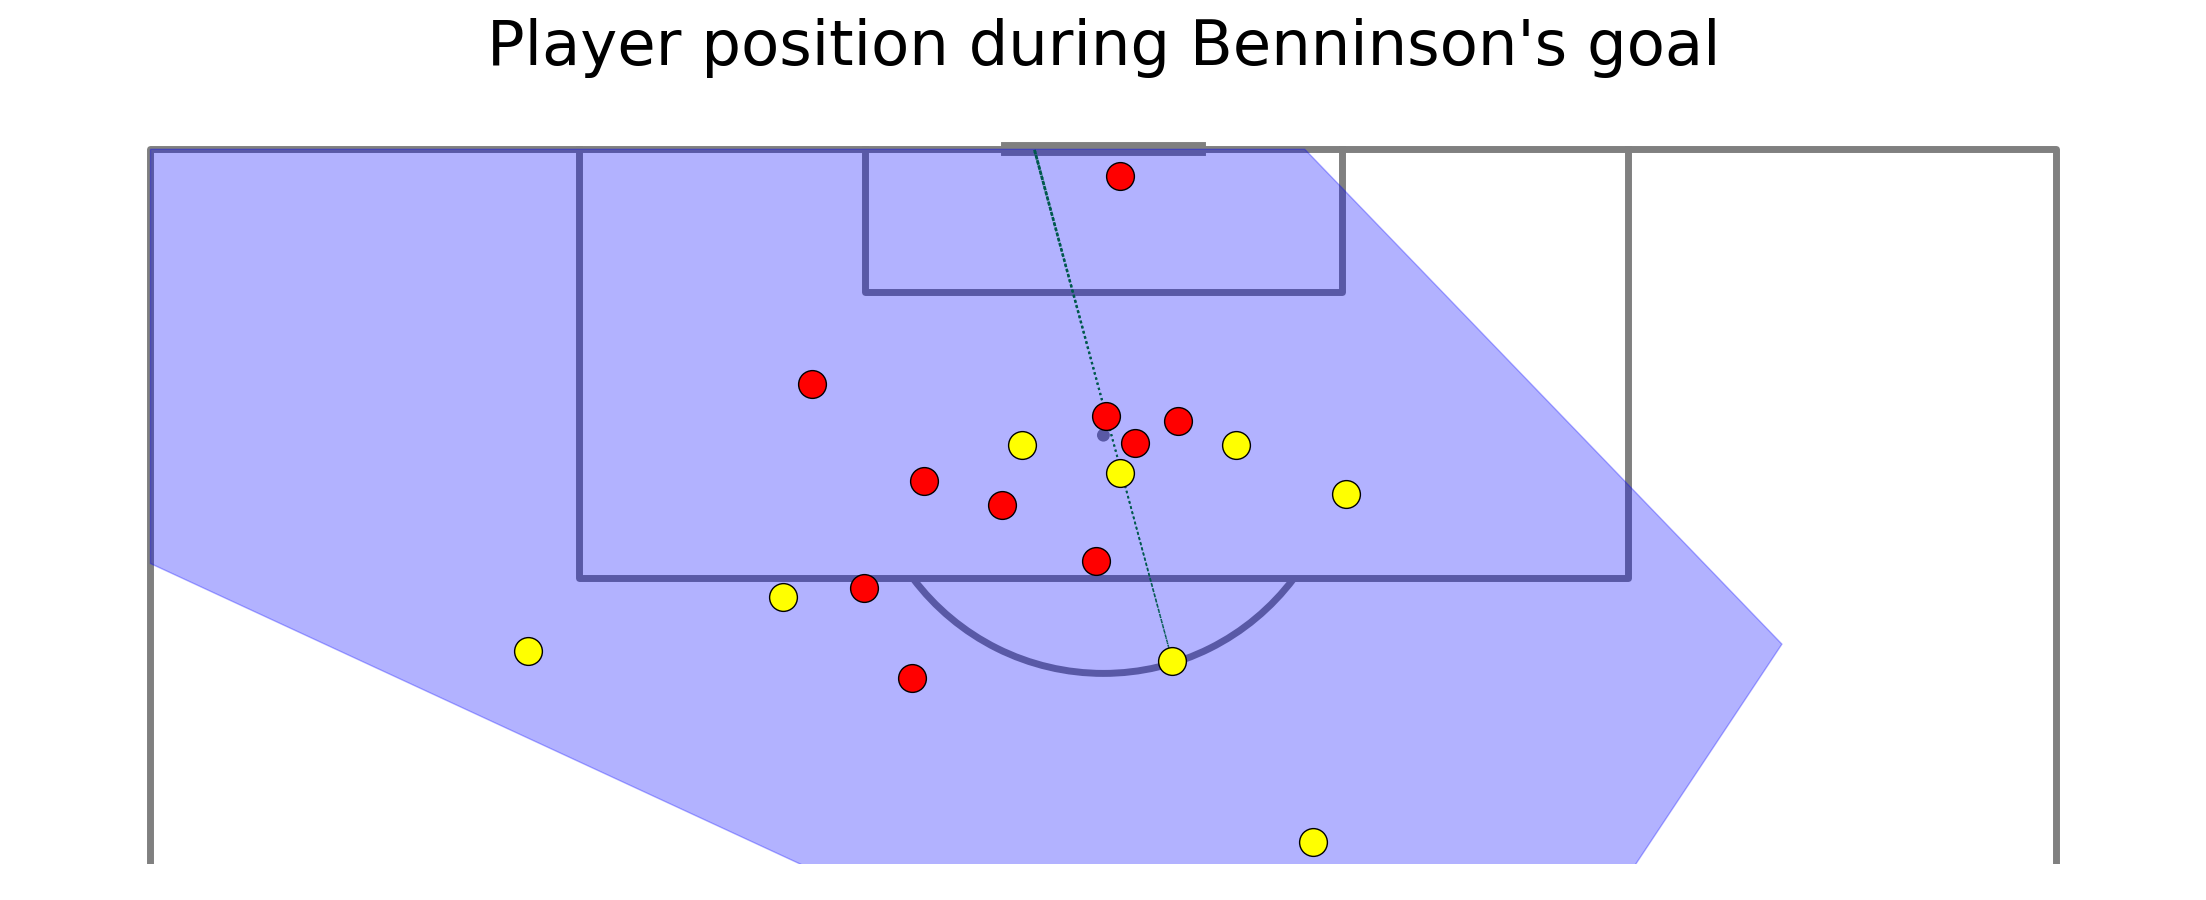 Player position during Benninson's goal